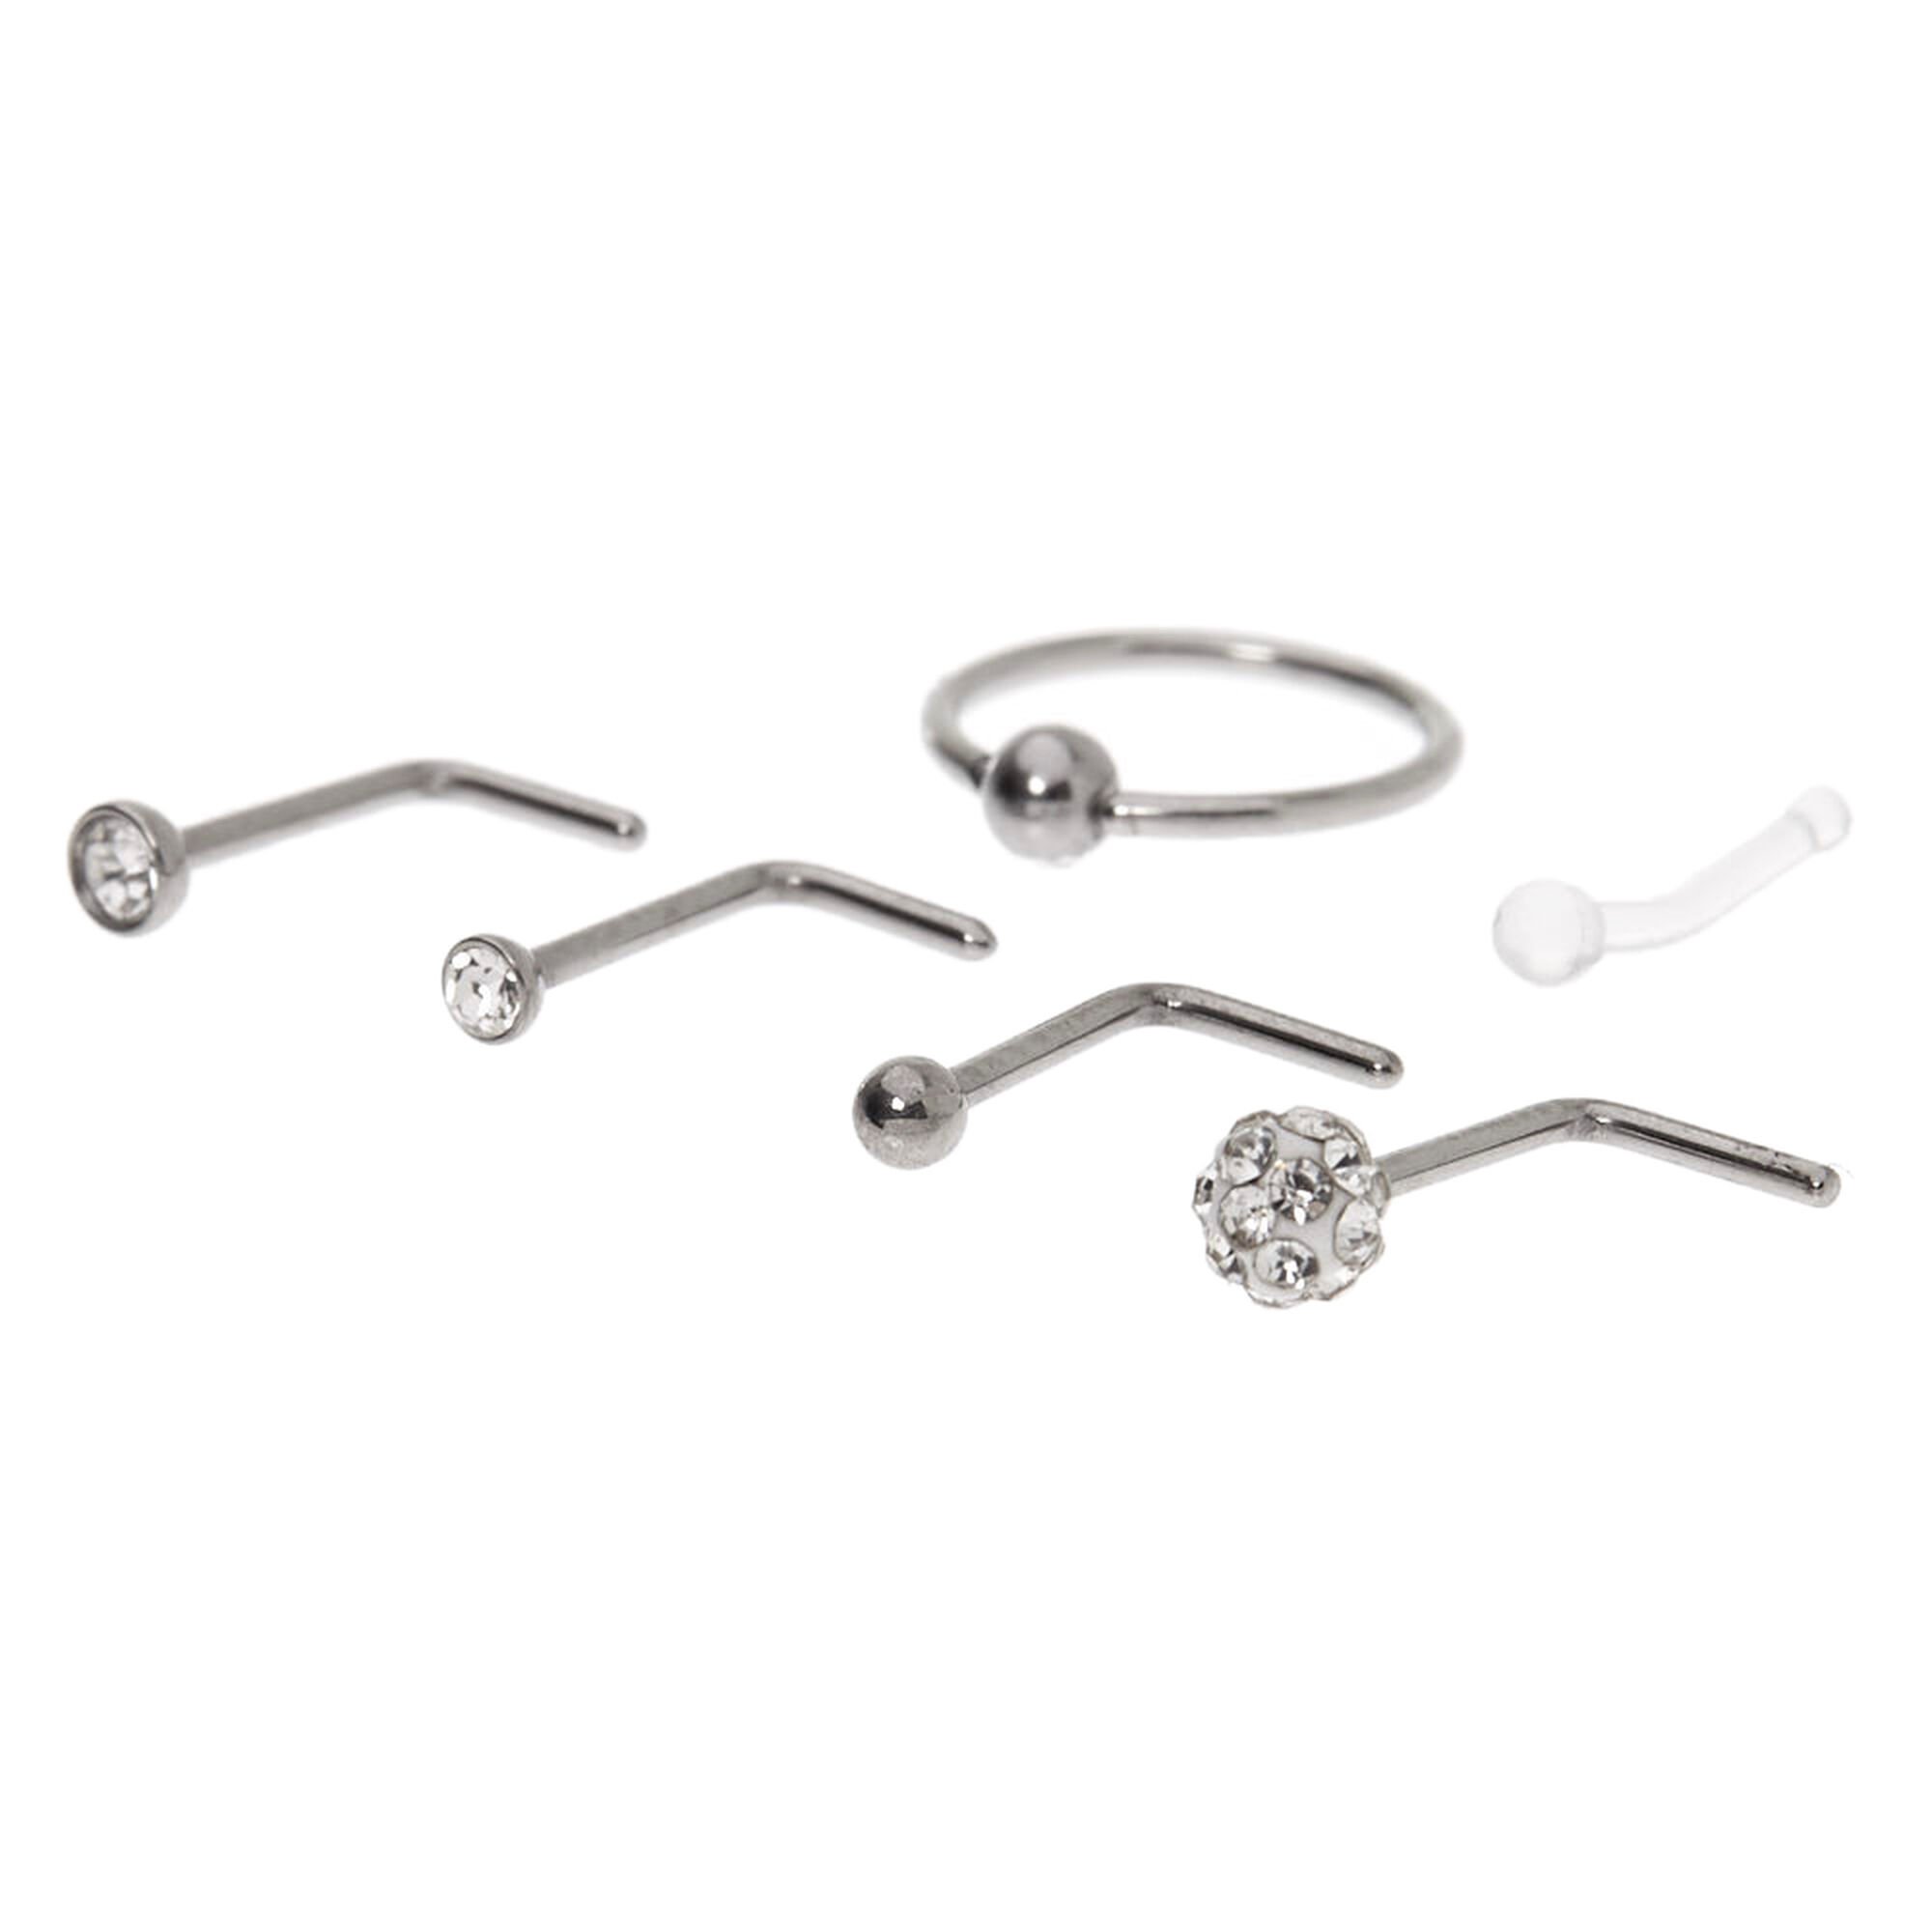 View Claires 20G Crystal Stud Hoop Nose Rings 6 Pack Silver information